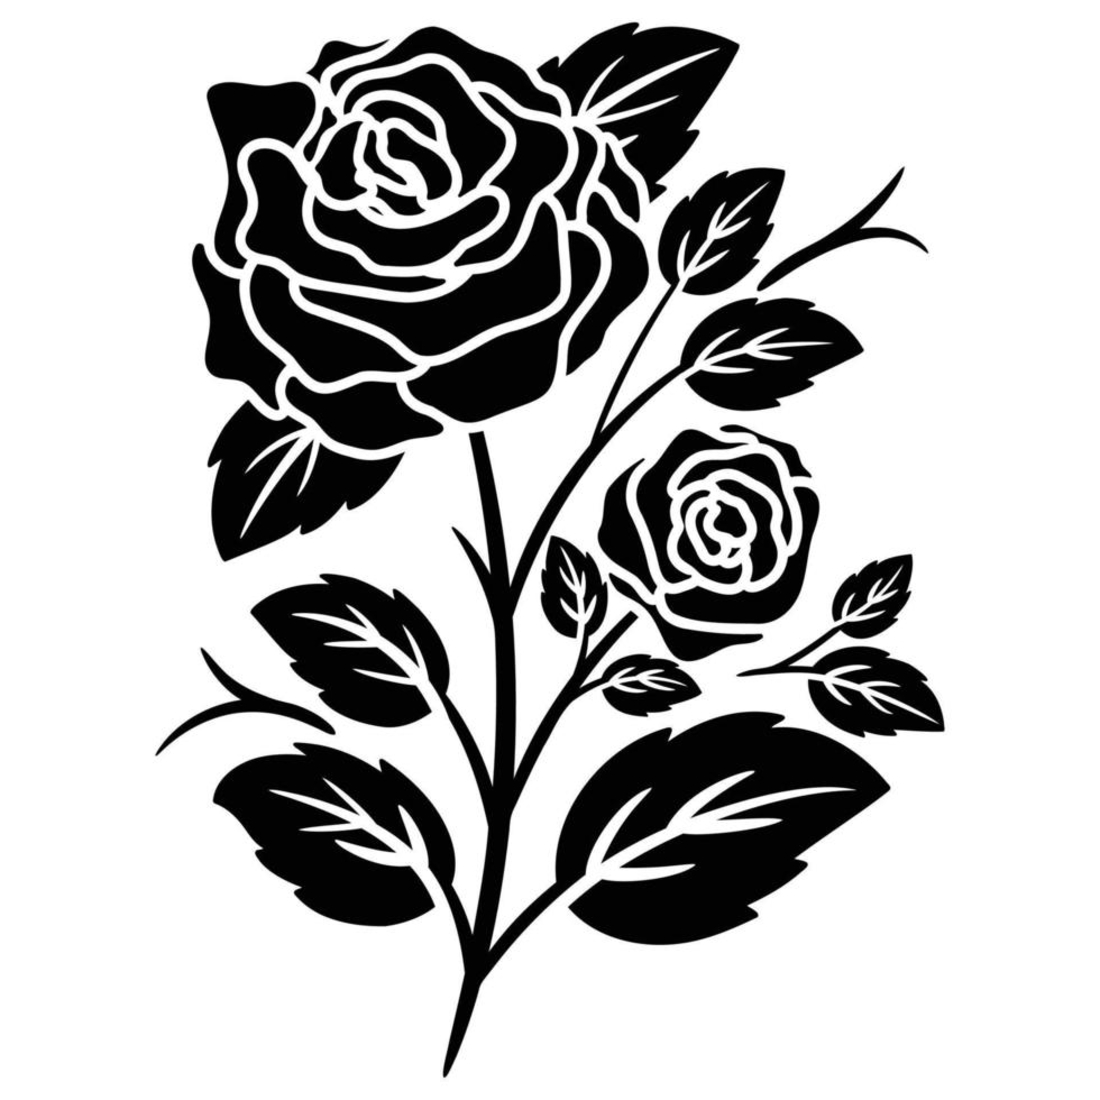 Hand drawn rose silhouette preview image.